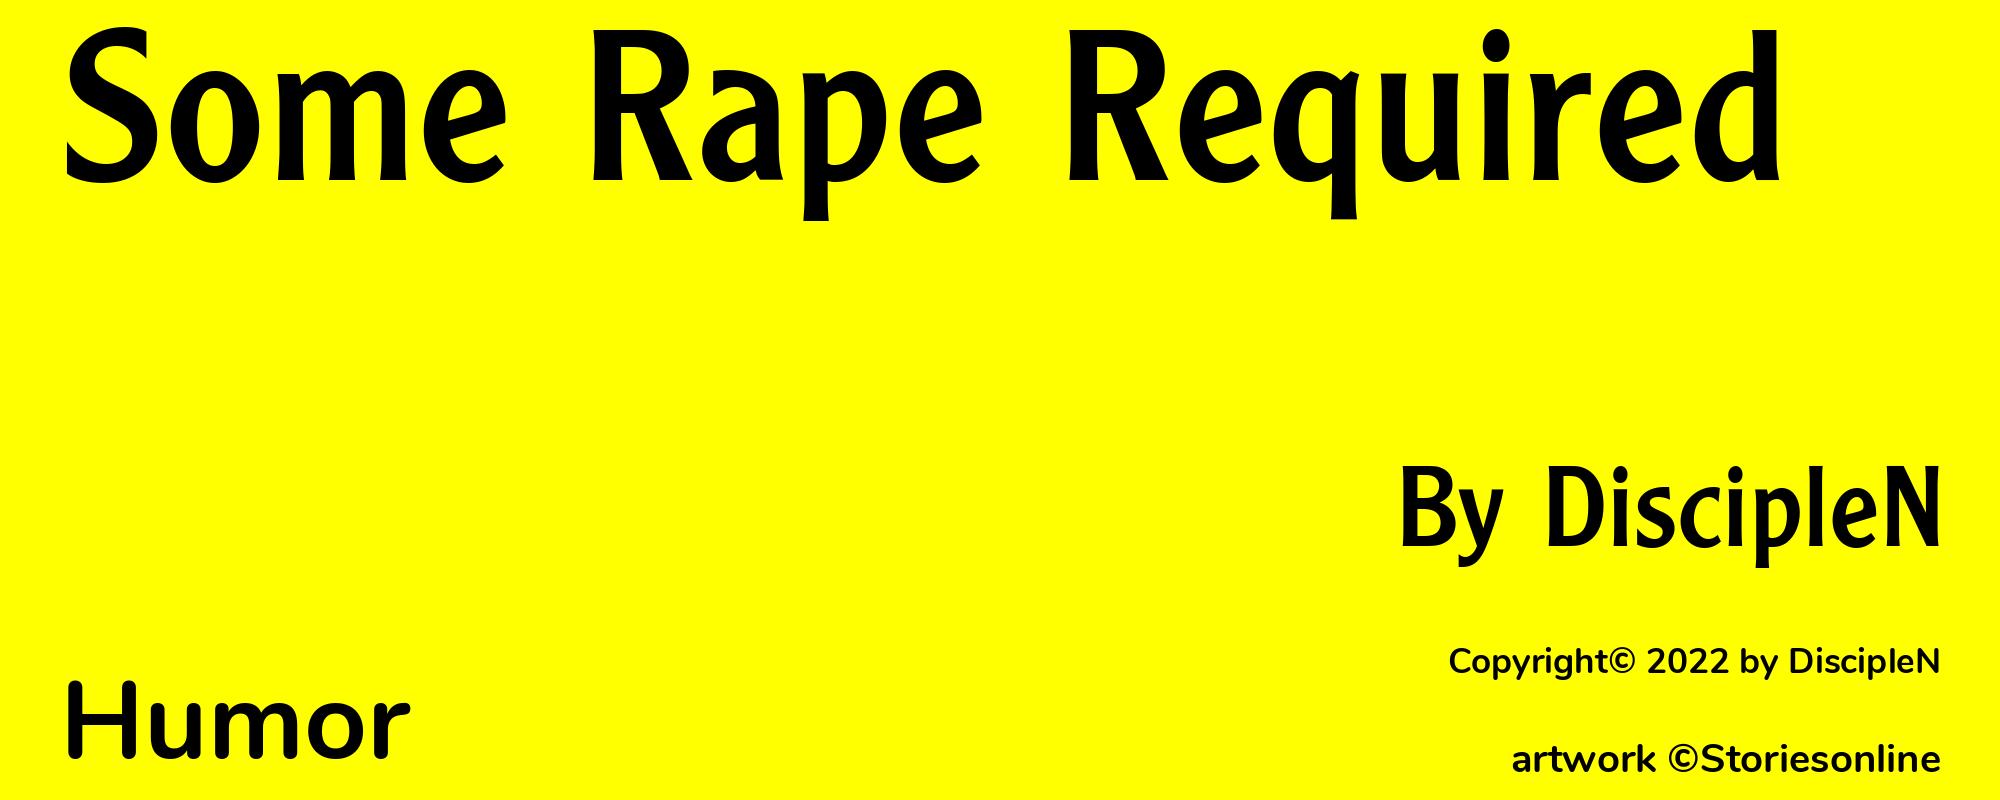 Some Rape Required - Cover